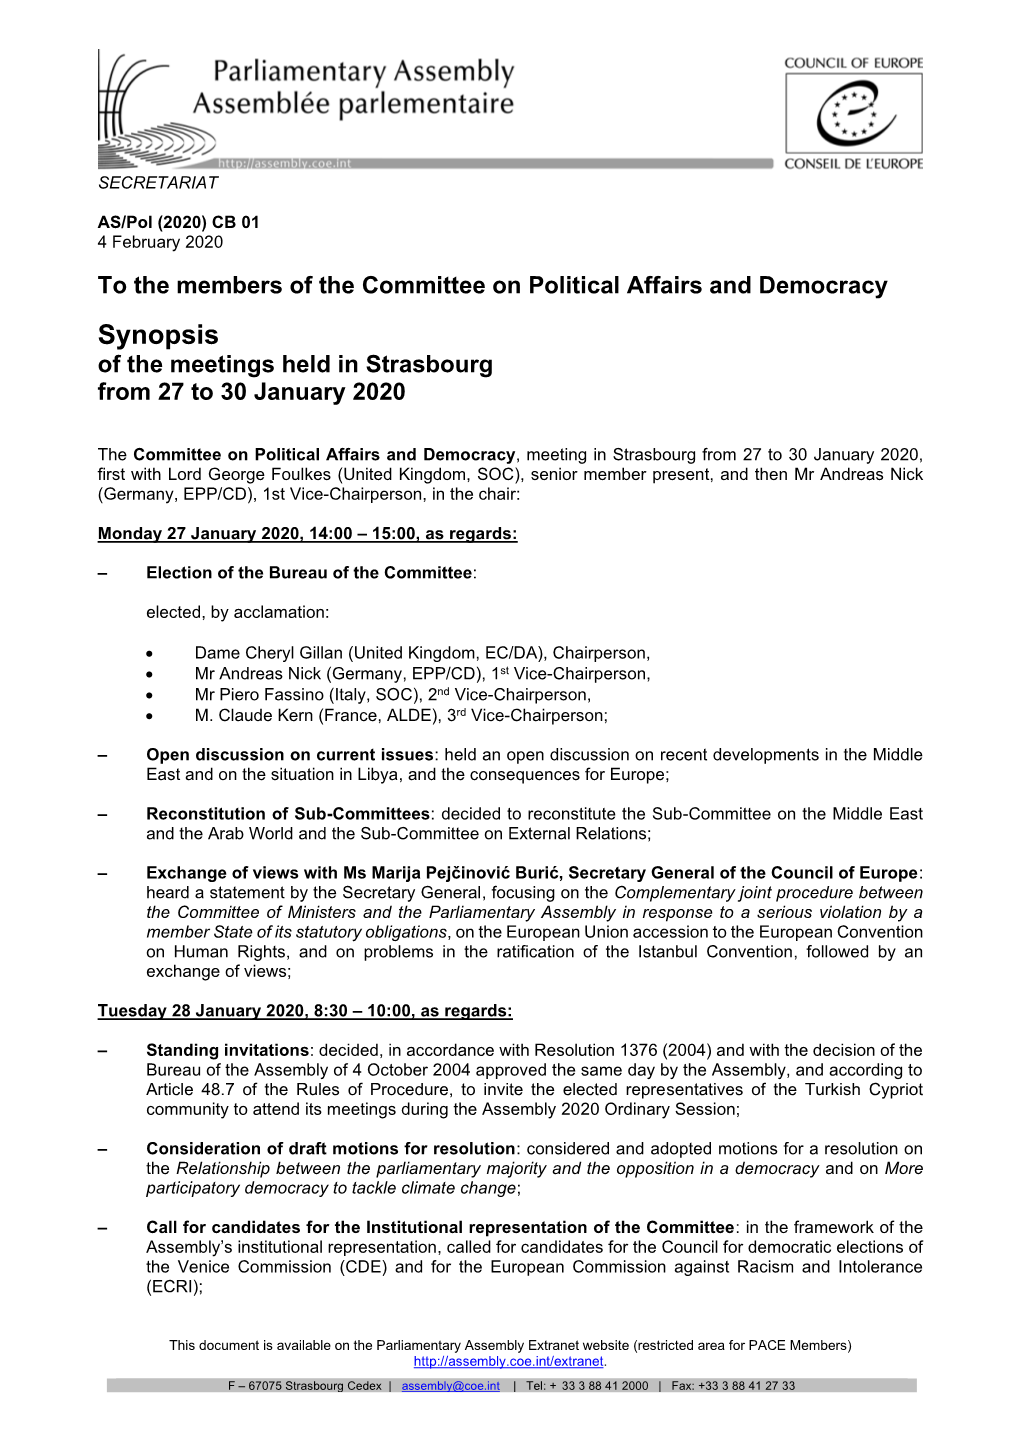 Synopsis of the Meetings Held in Strasbourg from 27 to 30 January 2020